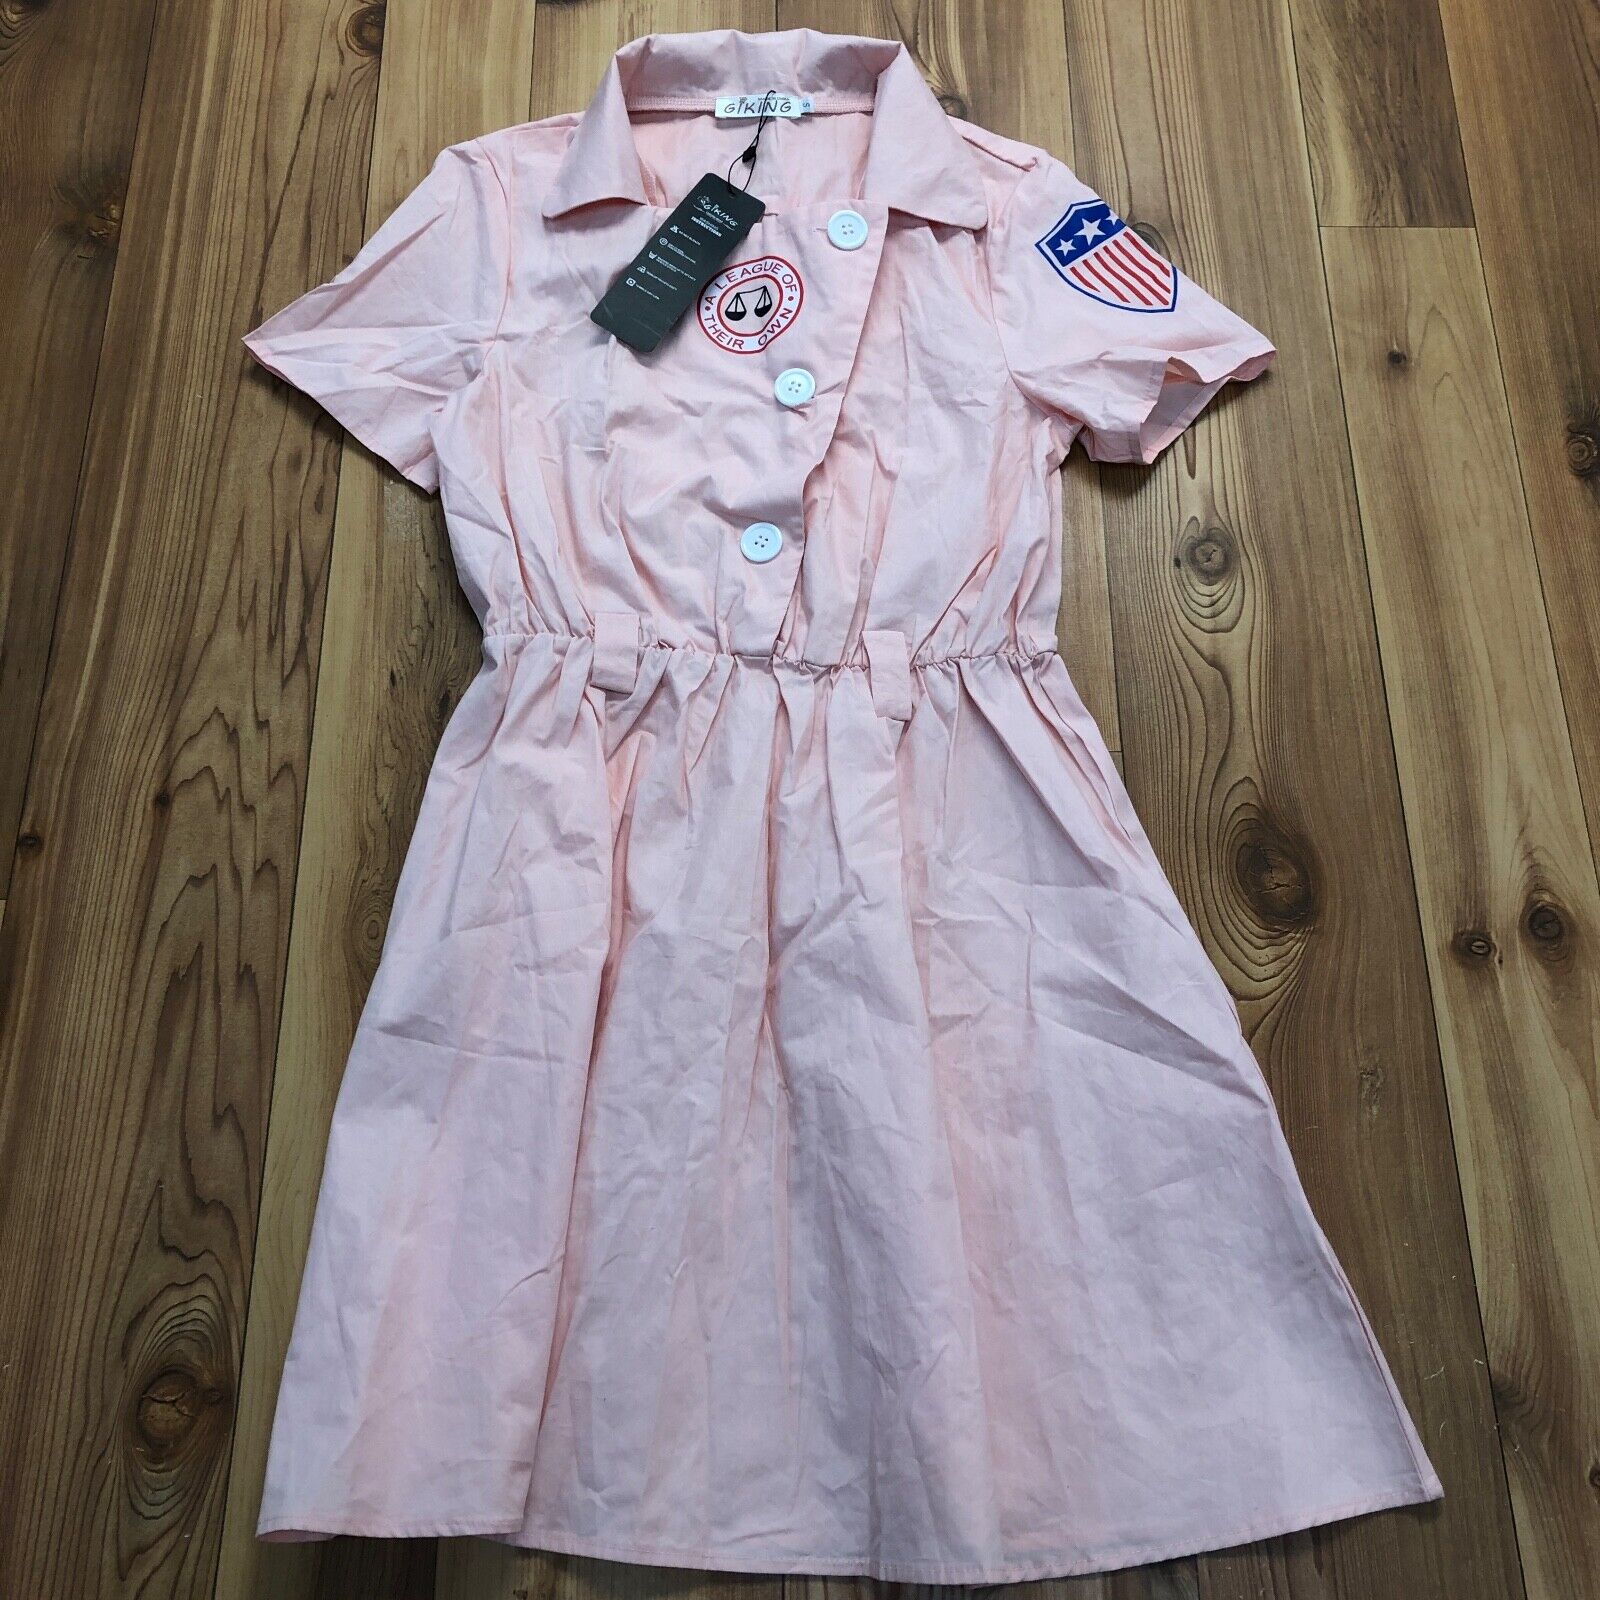 New GI King Pink A League of Their Own Dottie Baseball Costume Dress Size Small